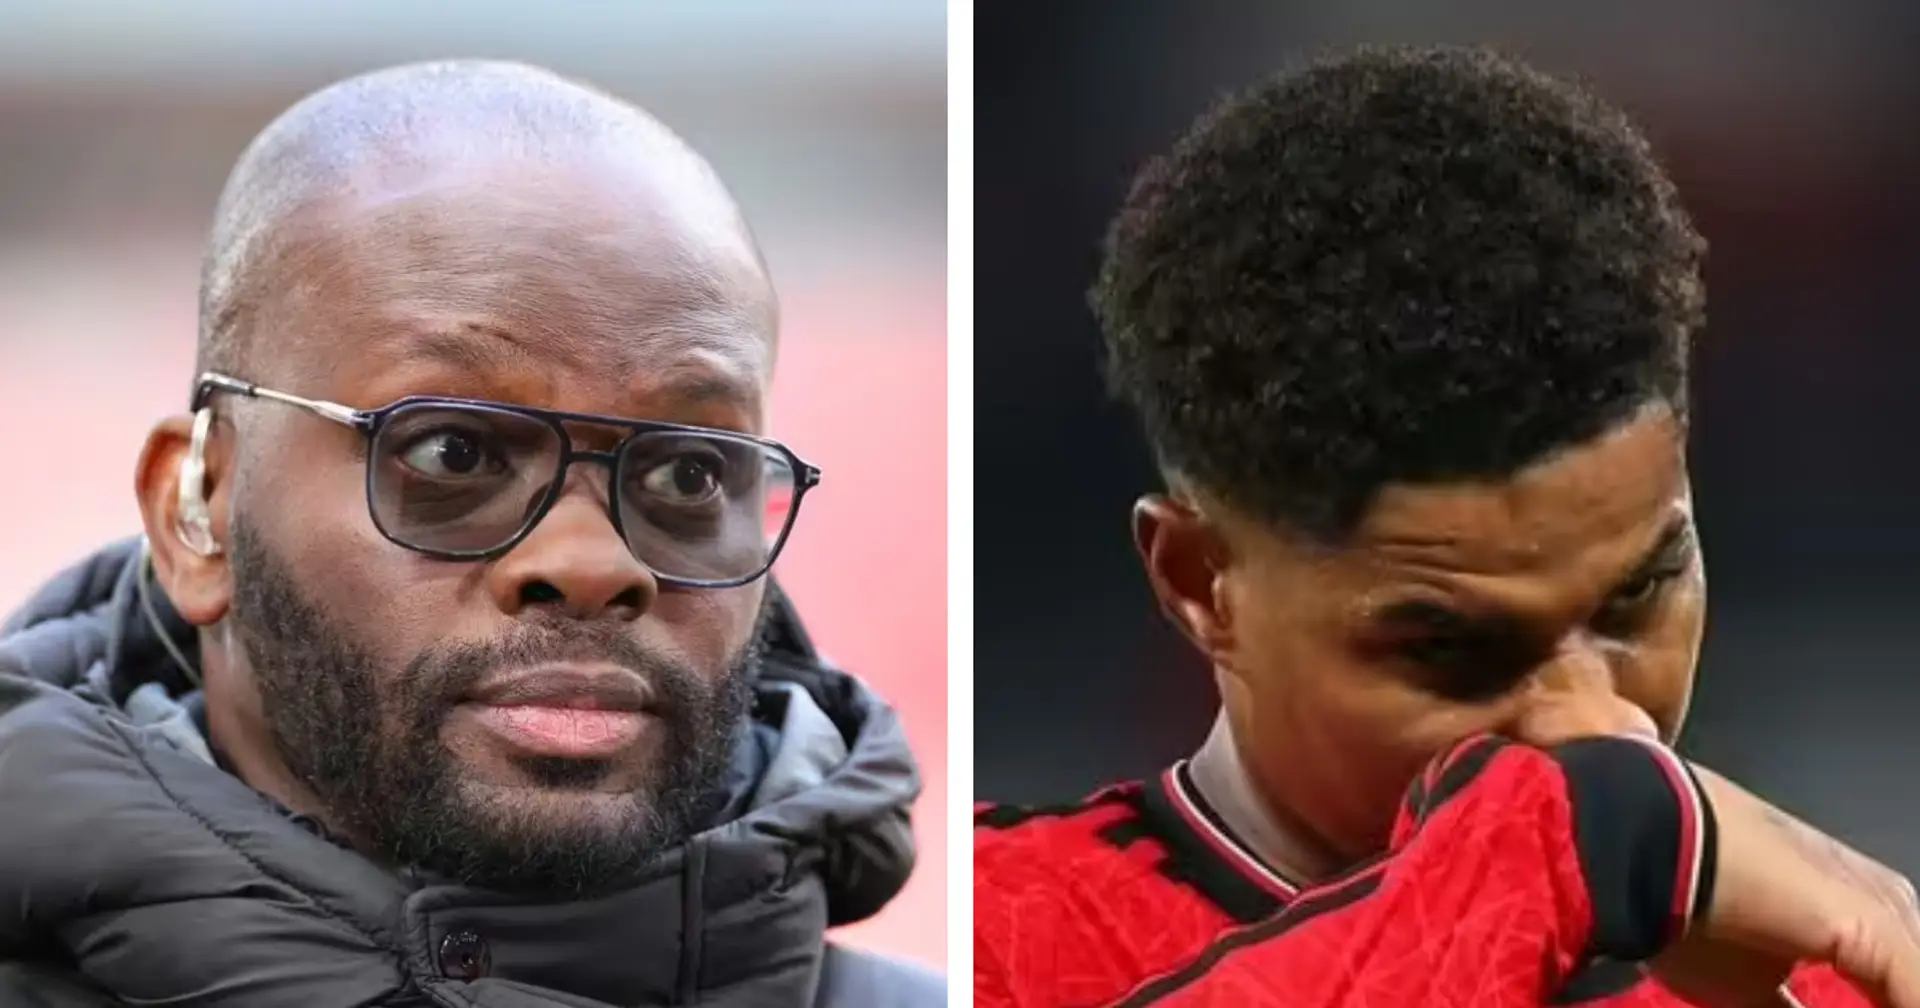 'The fans don't see emotion from Marcus': Louis Saha questions Rashford's passion